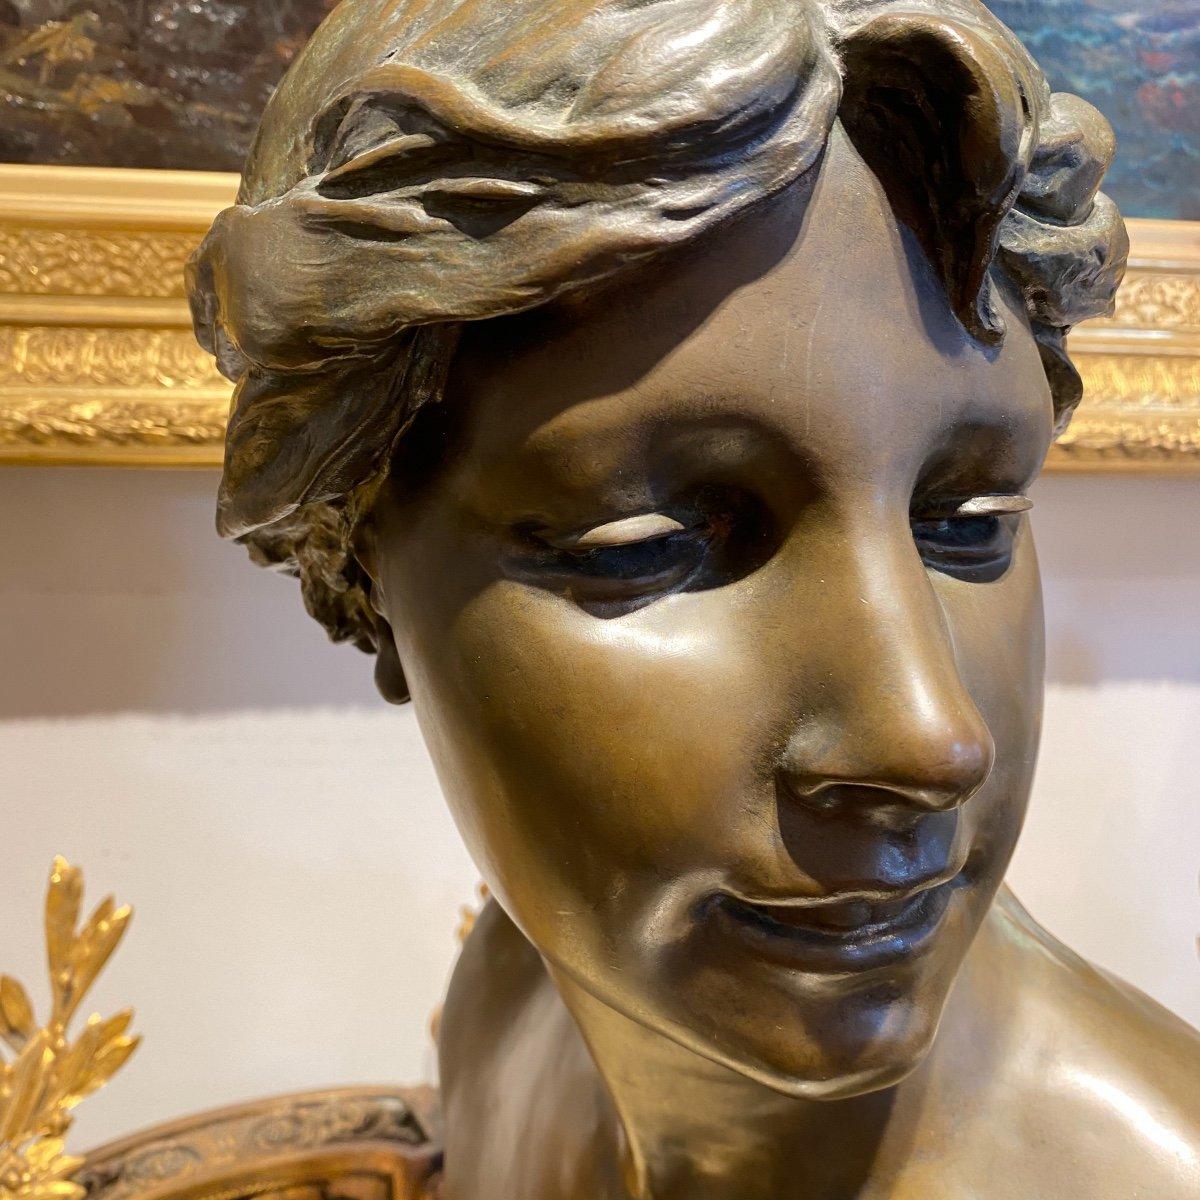 We present you this beautiful large bronze patinated sculpture from 1900, depicting a young woman and signed by Jules Blanchard (1833-1916). The foundry mark is present on the back, and it was cast by Thibault et Frères workshop in Paris, which also